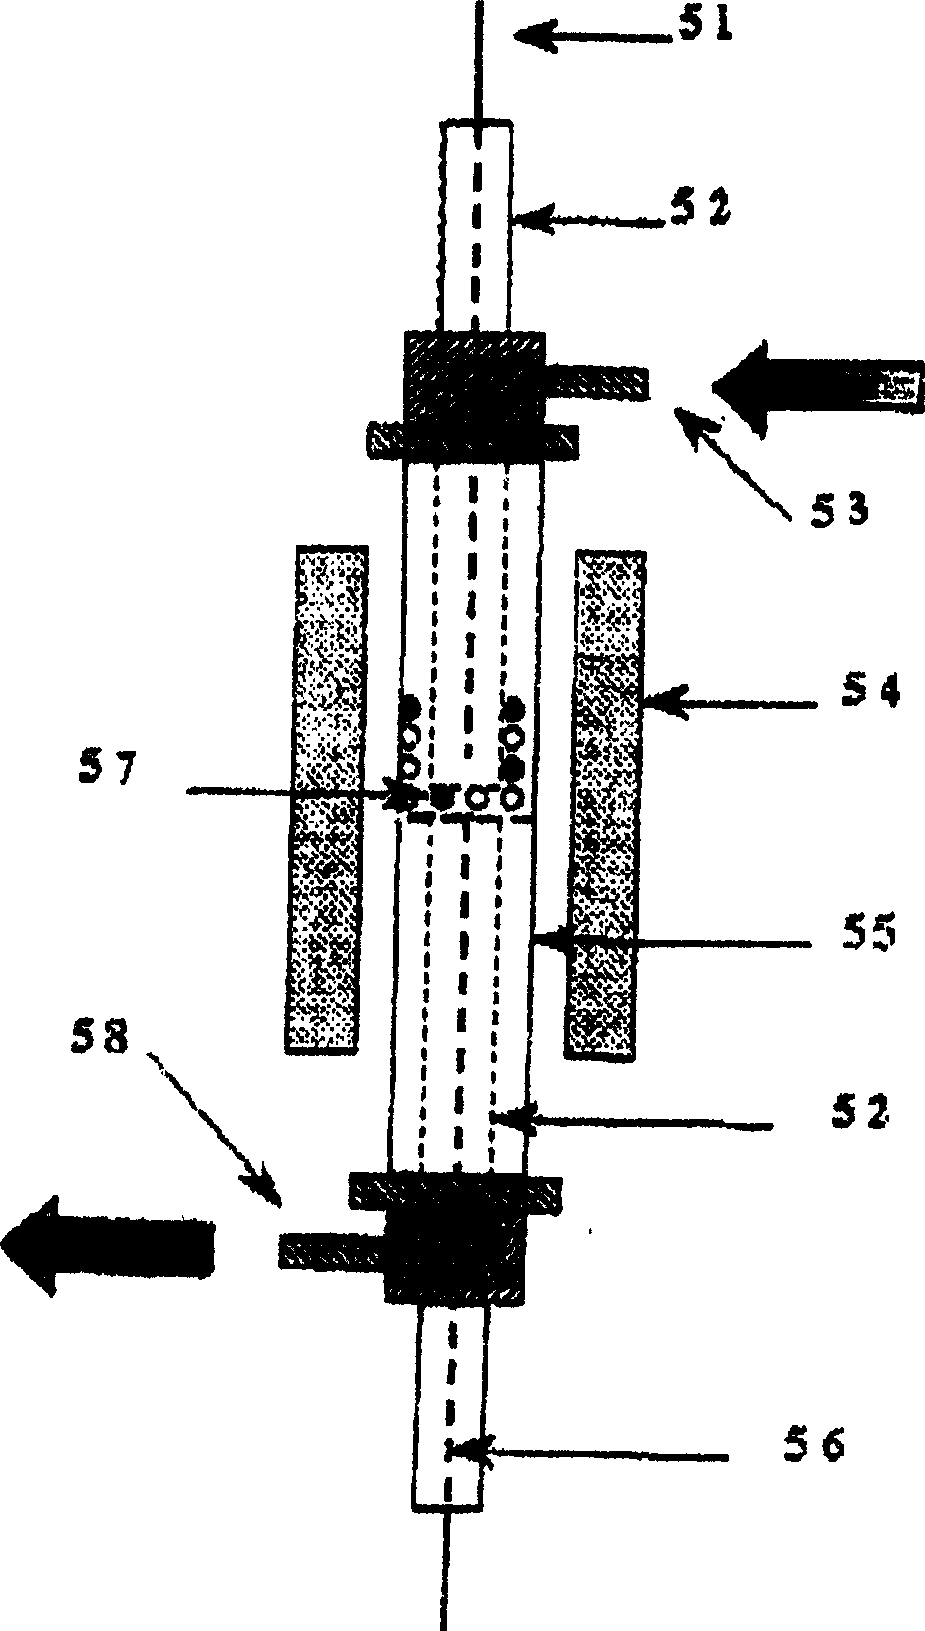 Process for preparing hydrogen by catalytic partial oxidation of liquid hydrocarbon